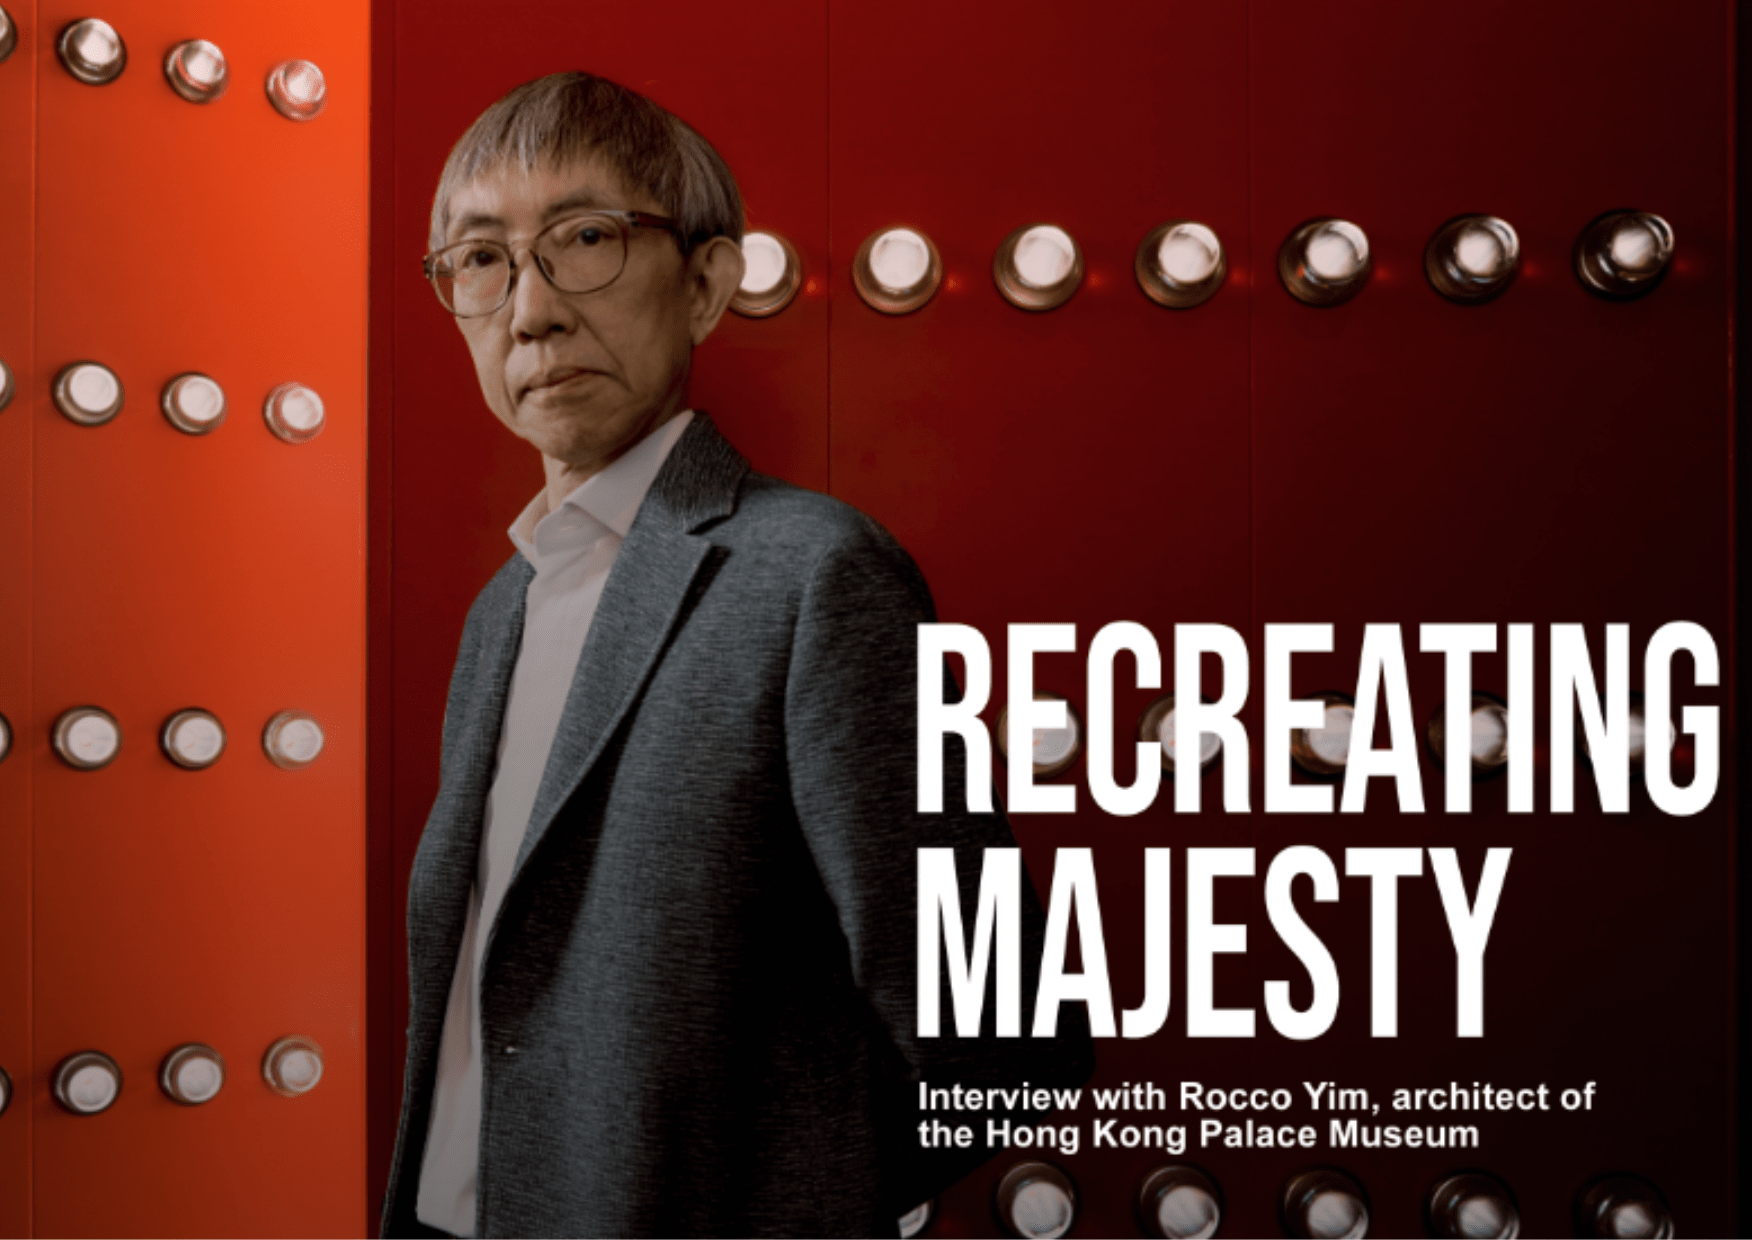 Recreating Majesty | Interview with Rocco Yim, Architect of the HK Palace Museum